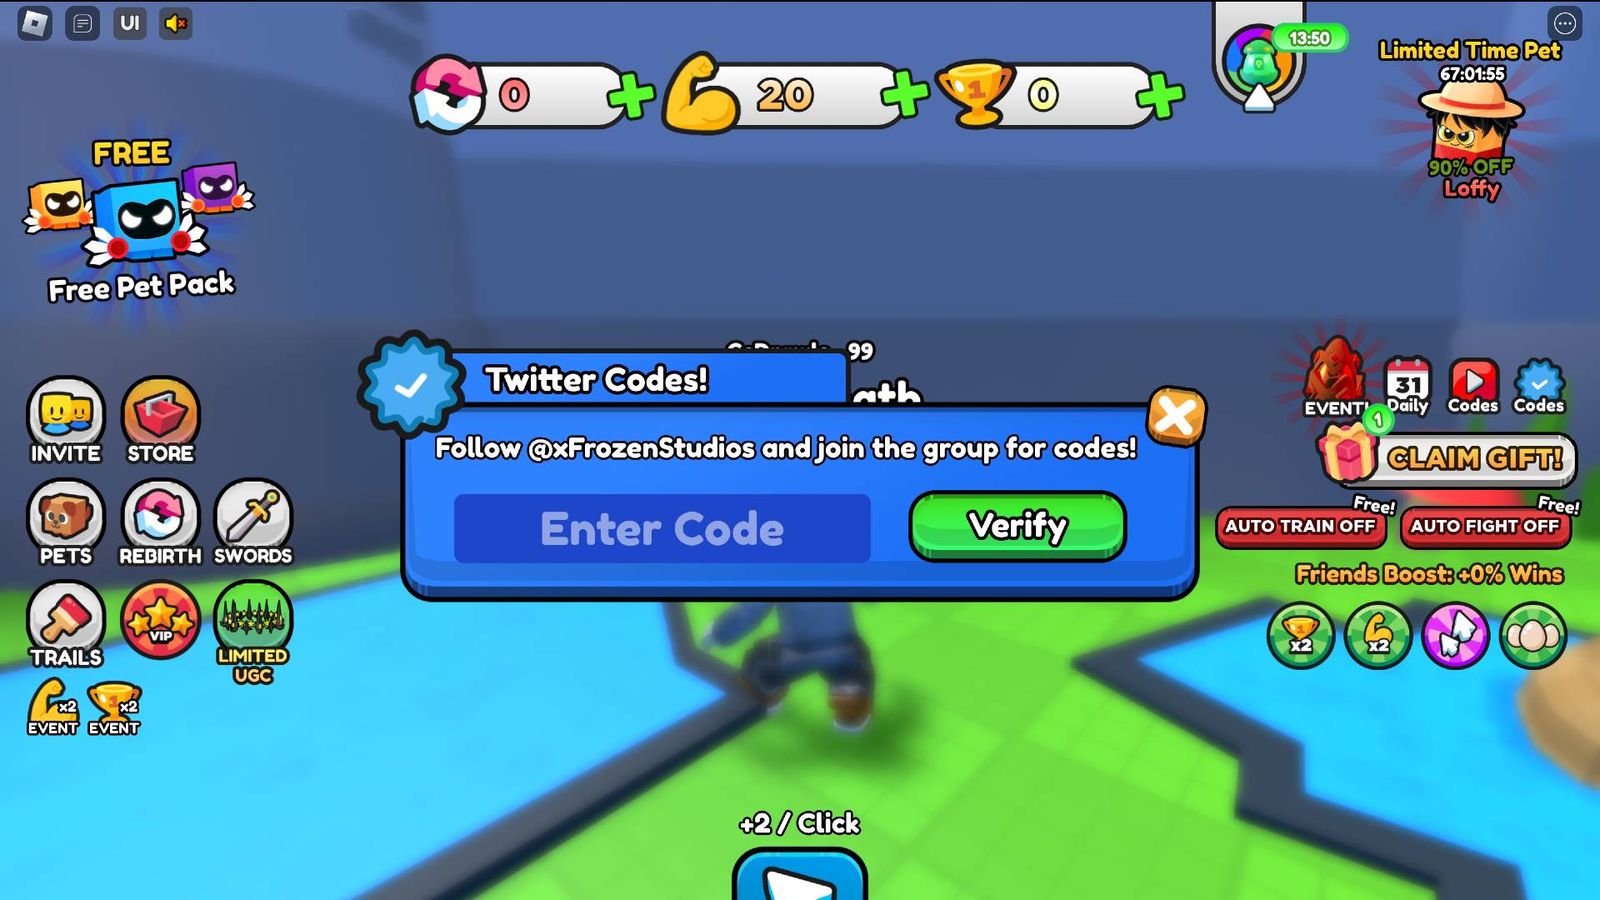 The code redemption screen in Pull a Sword on Roblox.